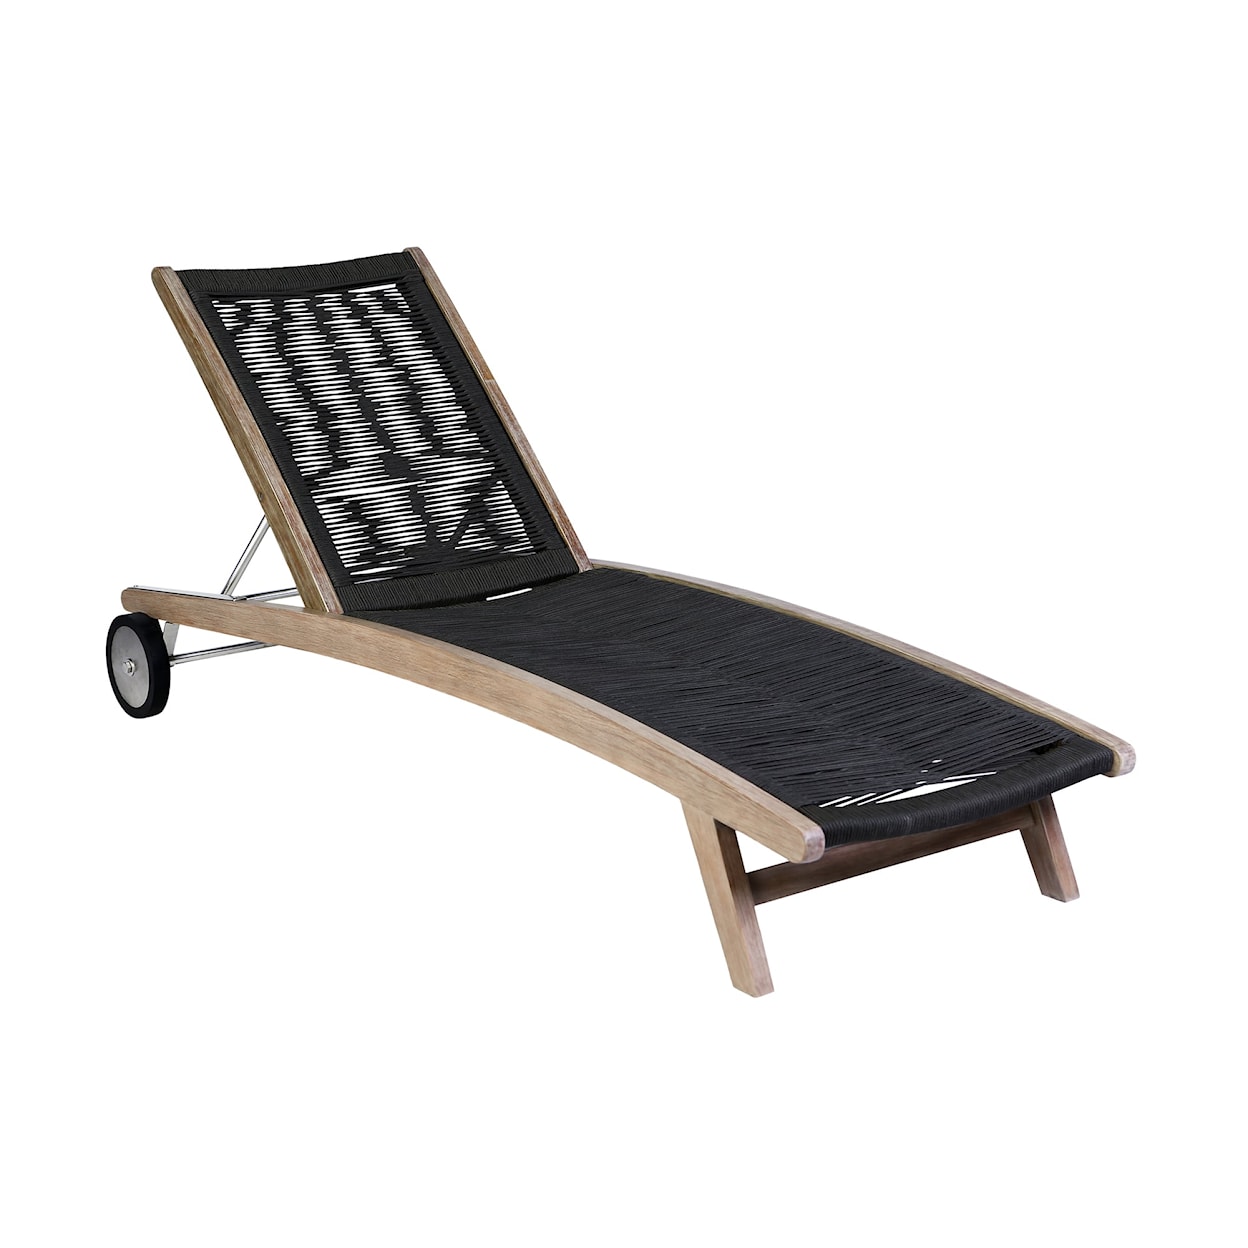 Armen Living Chateau Outdoor Chaise Lounge Chair